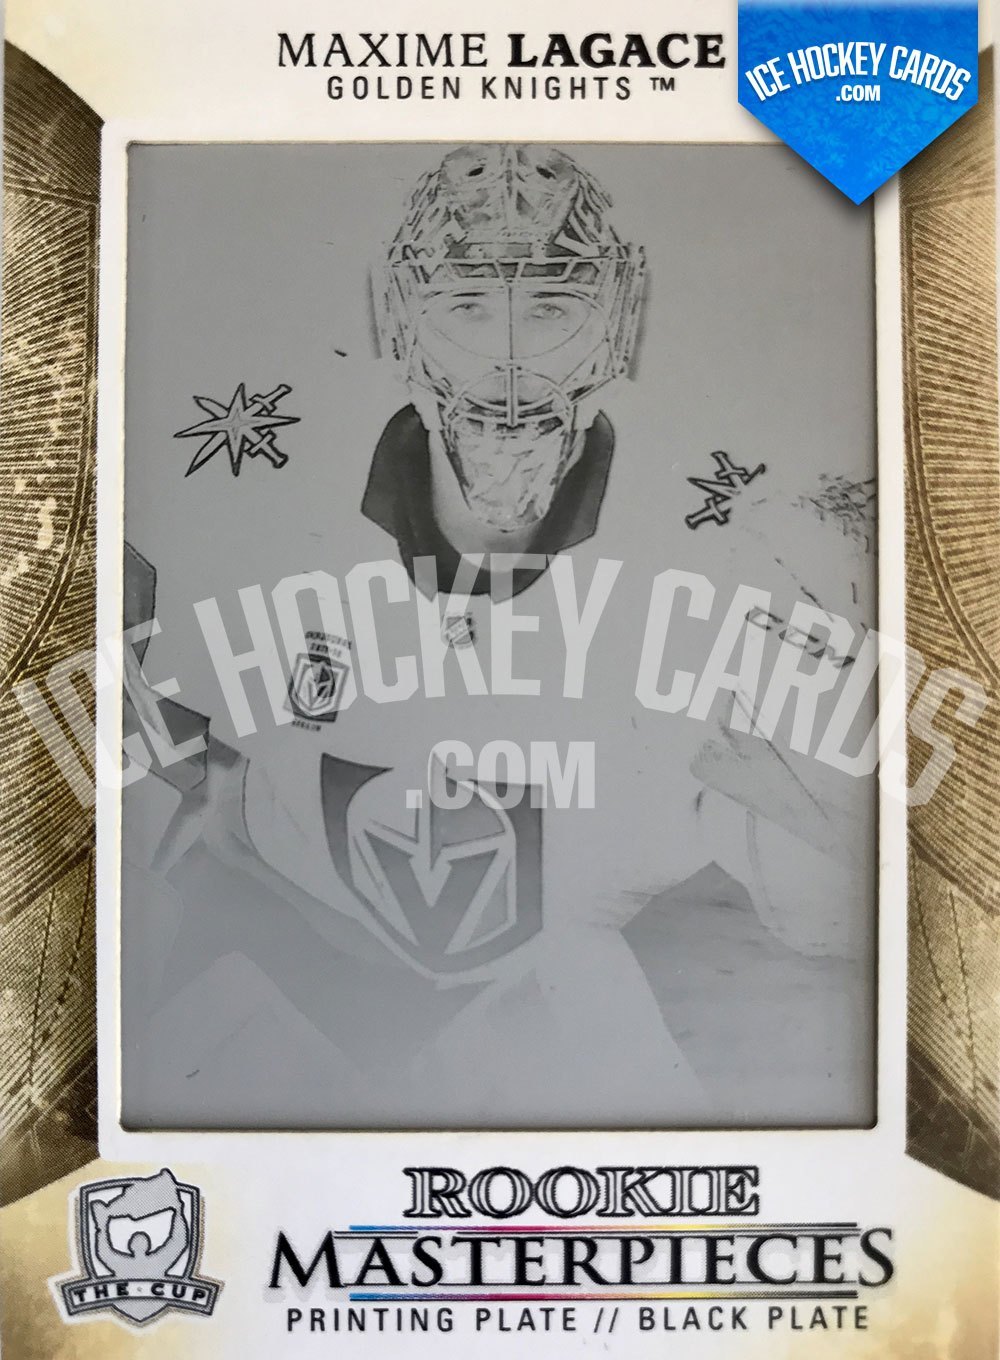 Upper Deck - The Cup 2017-18 - Maxime Lagace Rookie Masterpieces Printing Plate RC - 1 of 1 UNIQUE